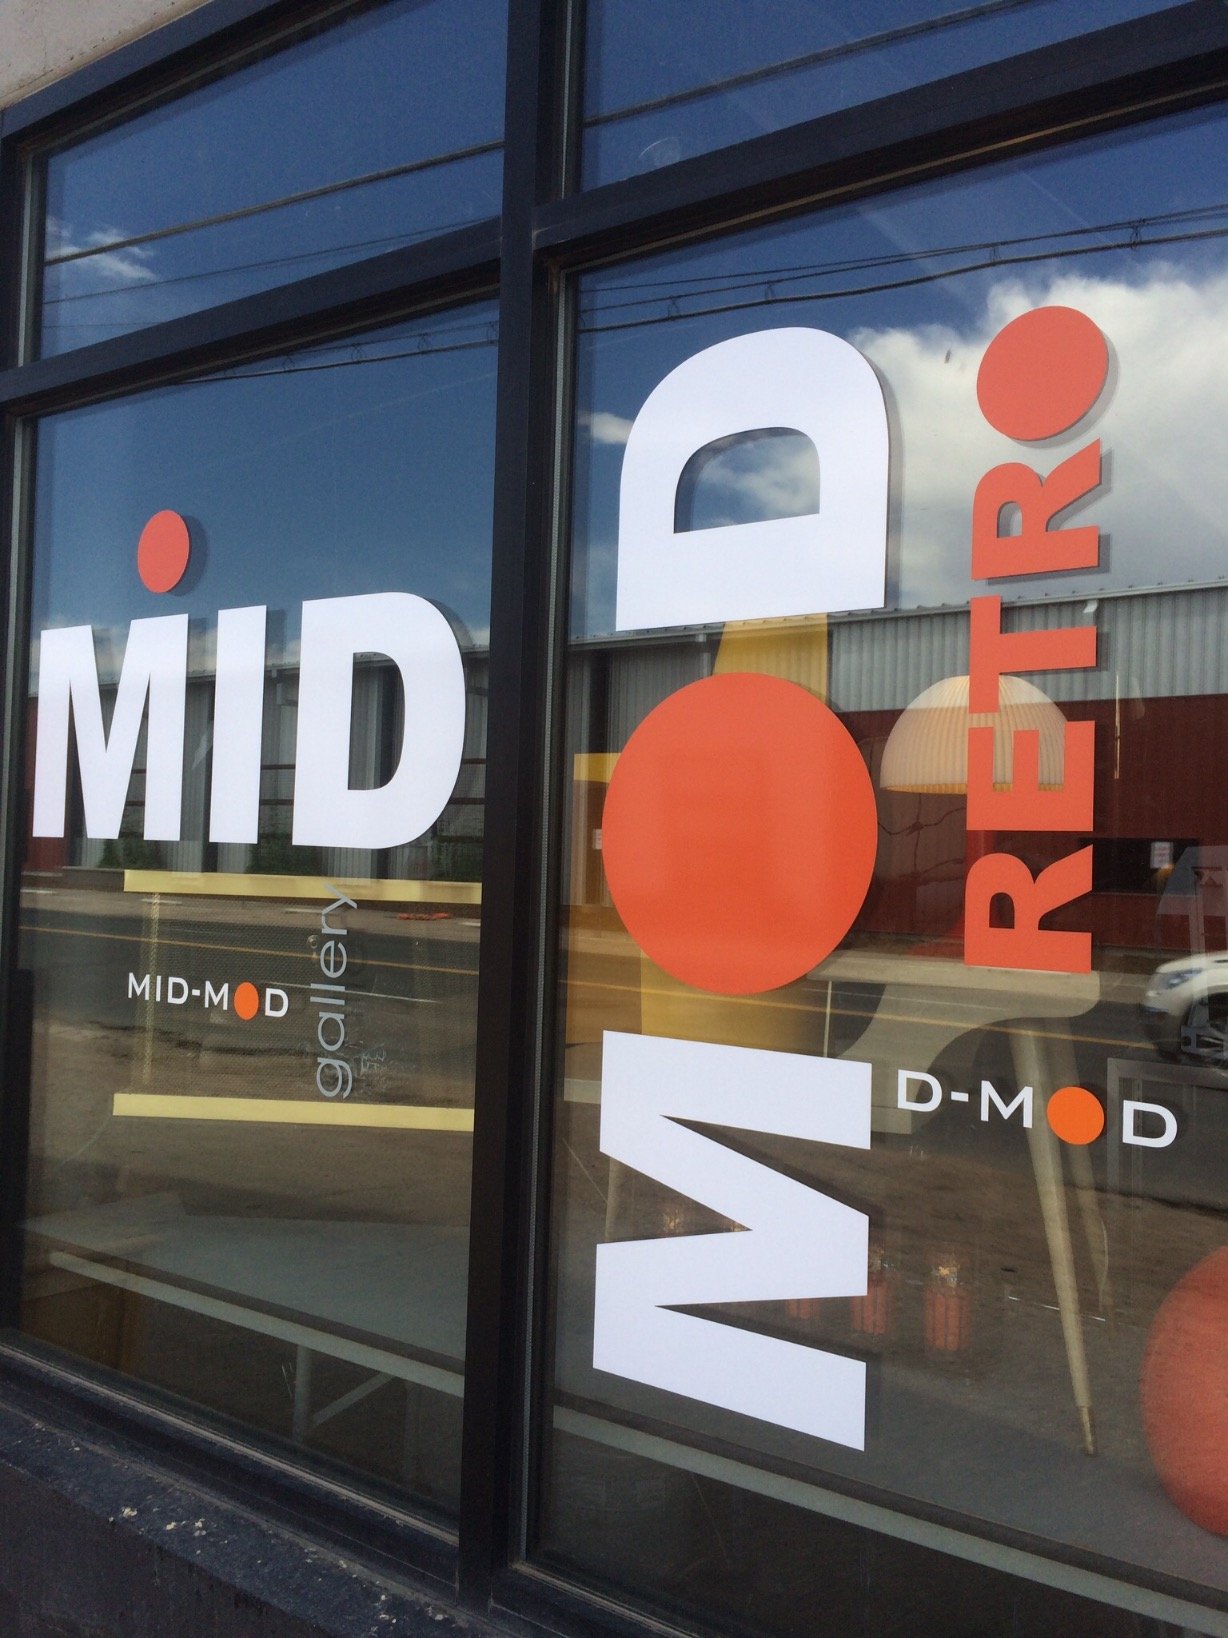 Loving Mid-Century Modern, one piece at a time. #MidCenturyDenver #midmodmall #MidModMallDenver #MidModMall #MidModGallery #MidCenturyFurnitureDenver #midcentur